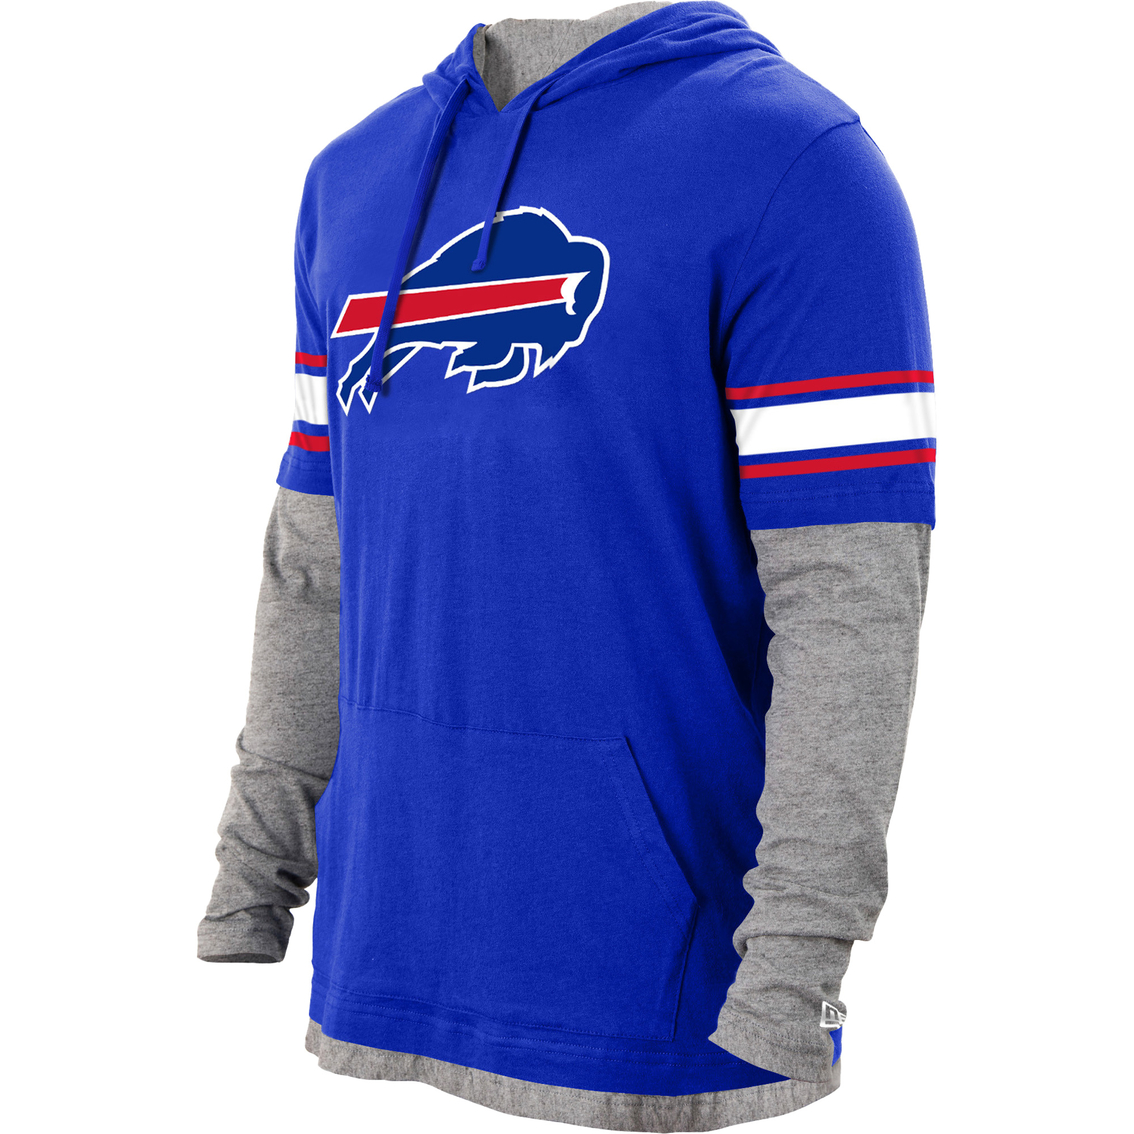 New Era Cap Co. NFL Team Brushed Cotton Pullover Hoodie - Image 3 of 5